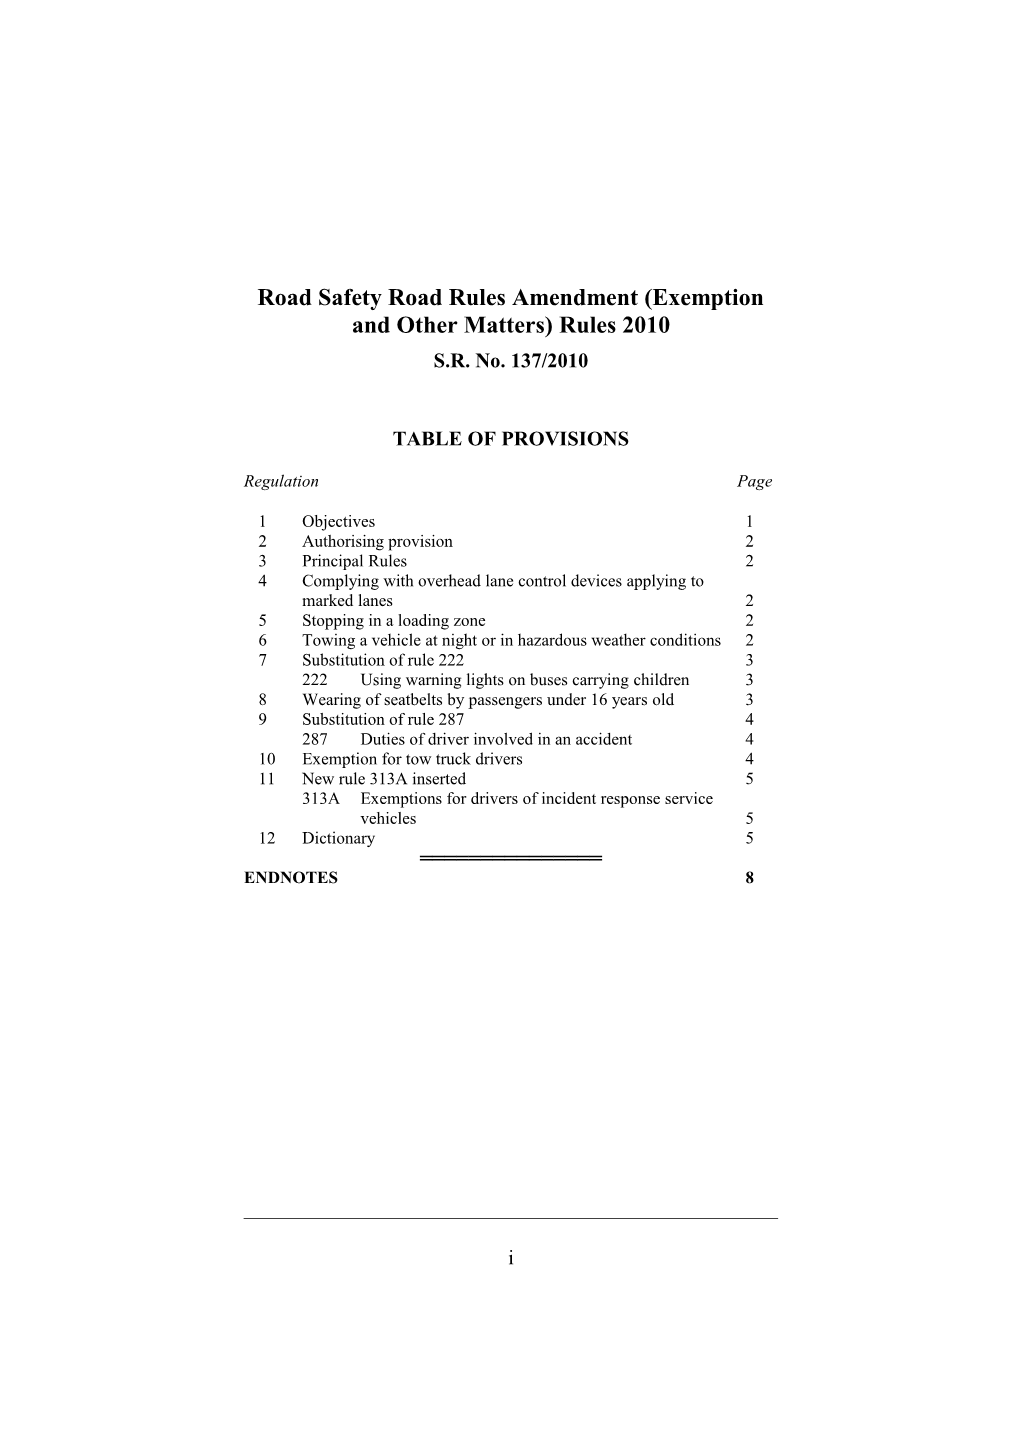 Road Safety Road Rules Amendment (Exemption and Other Matters) Rules 2010